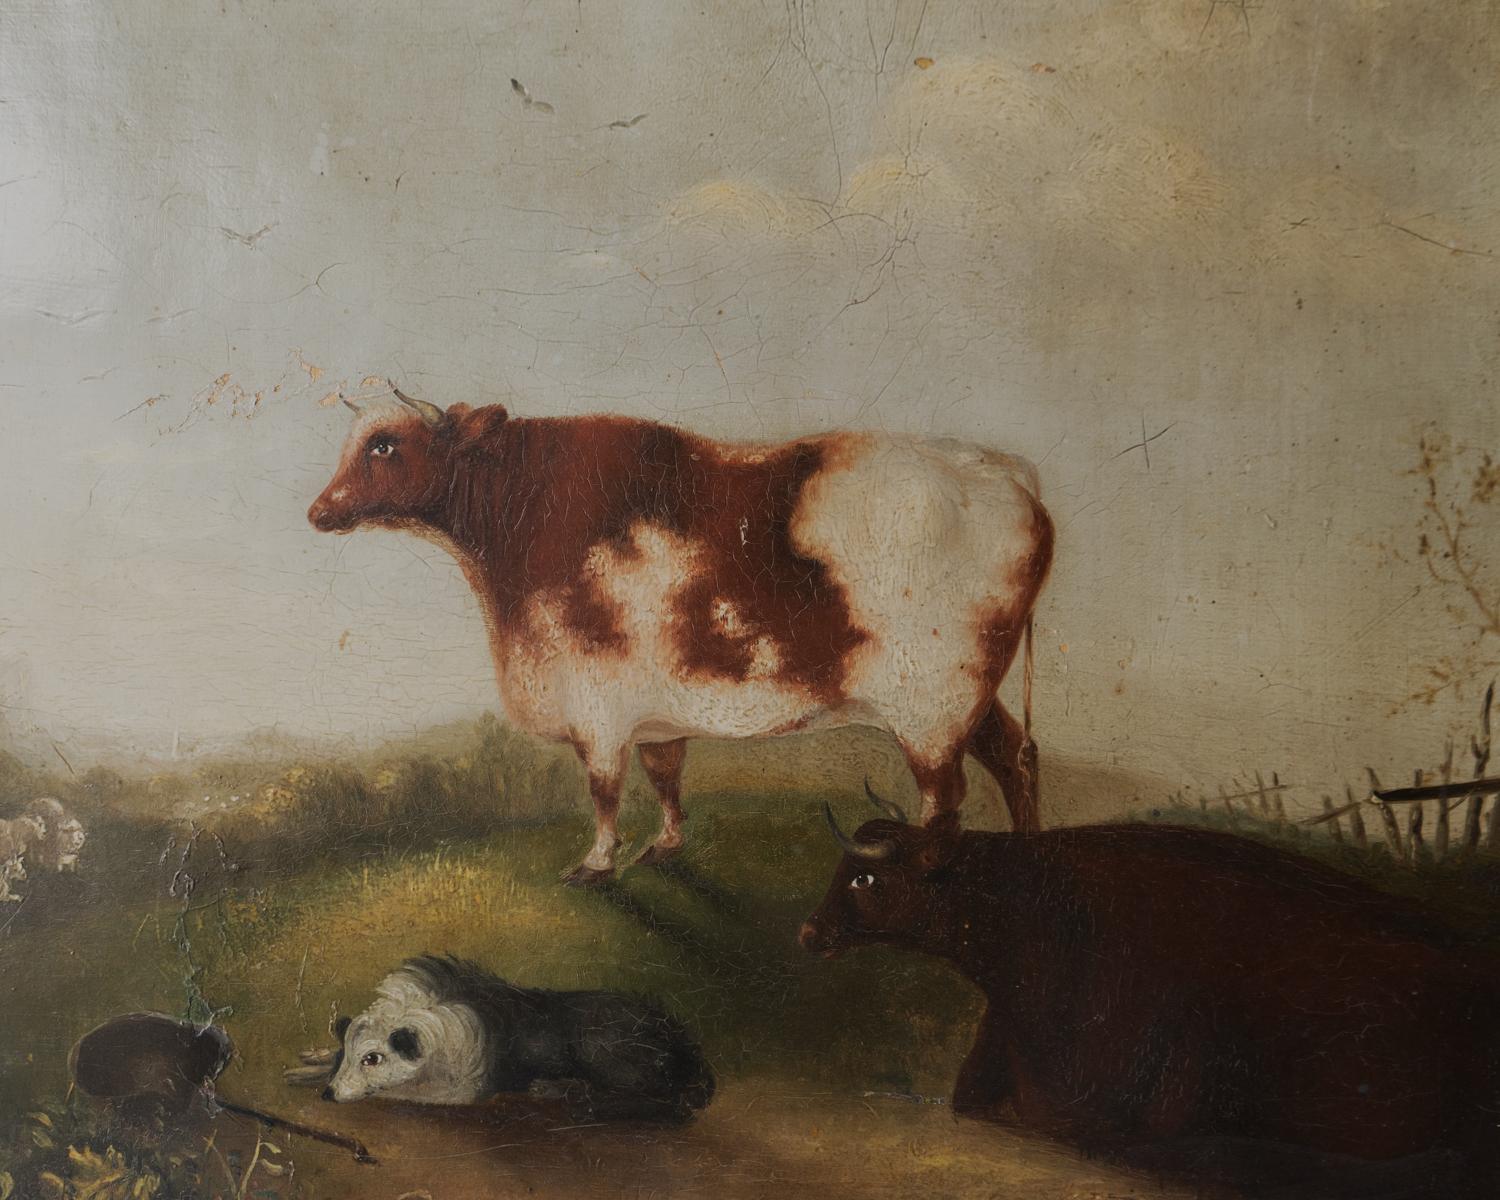 Painted Naive Folk Art Depiction of Cattle, Sheep & Sheepdog, Antique Oil Painting